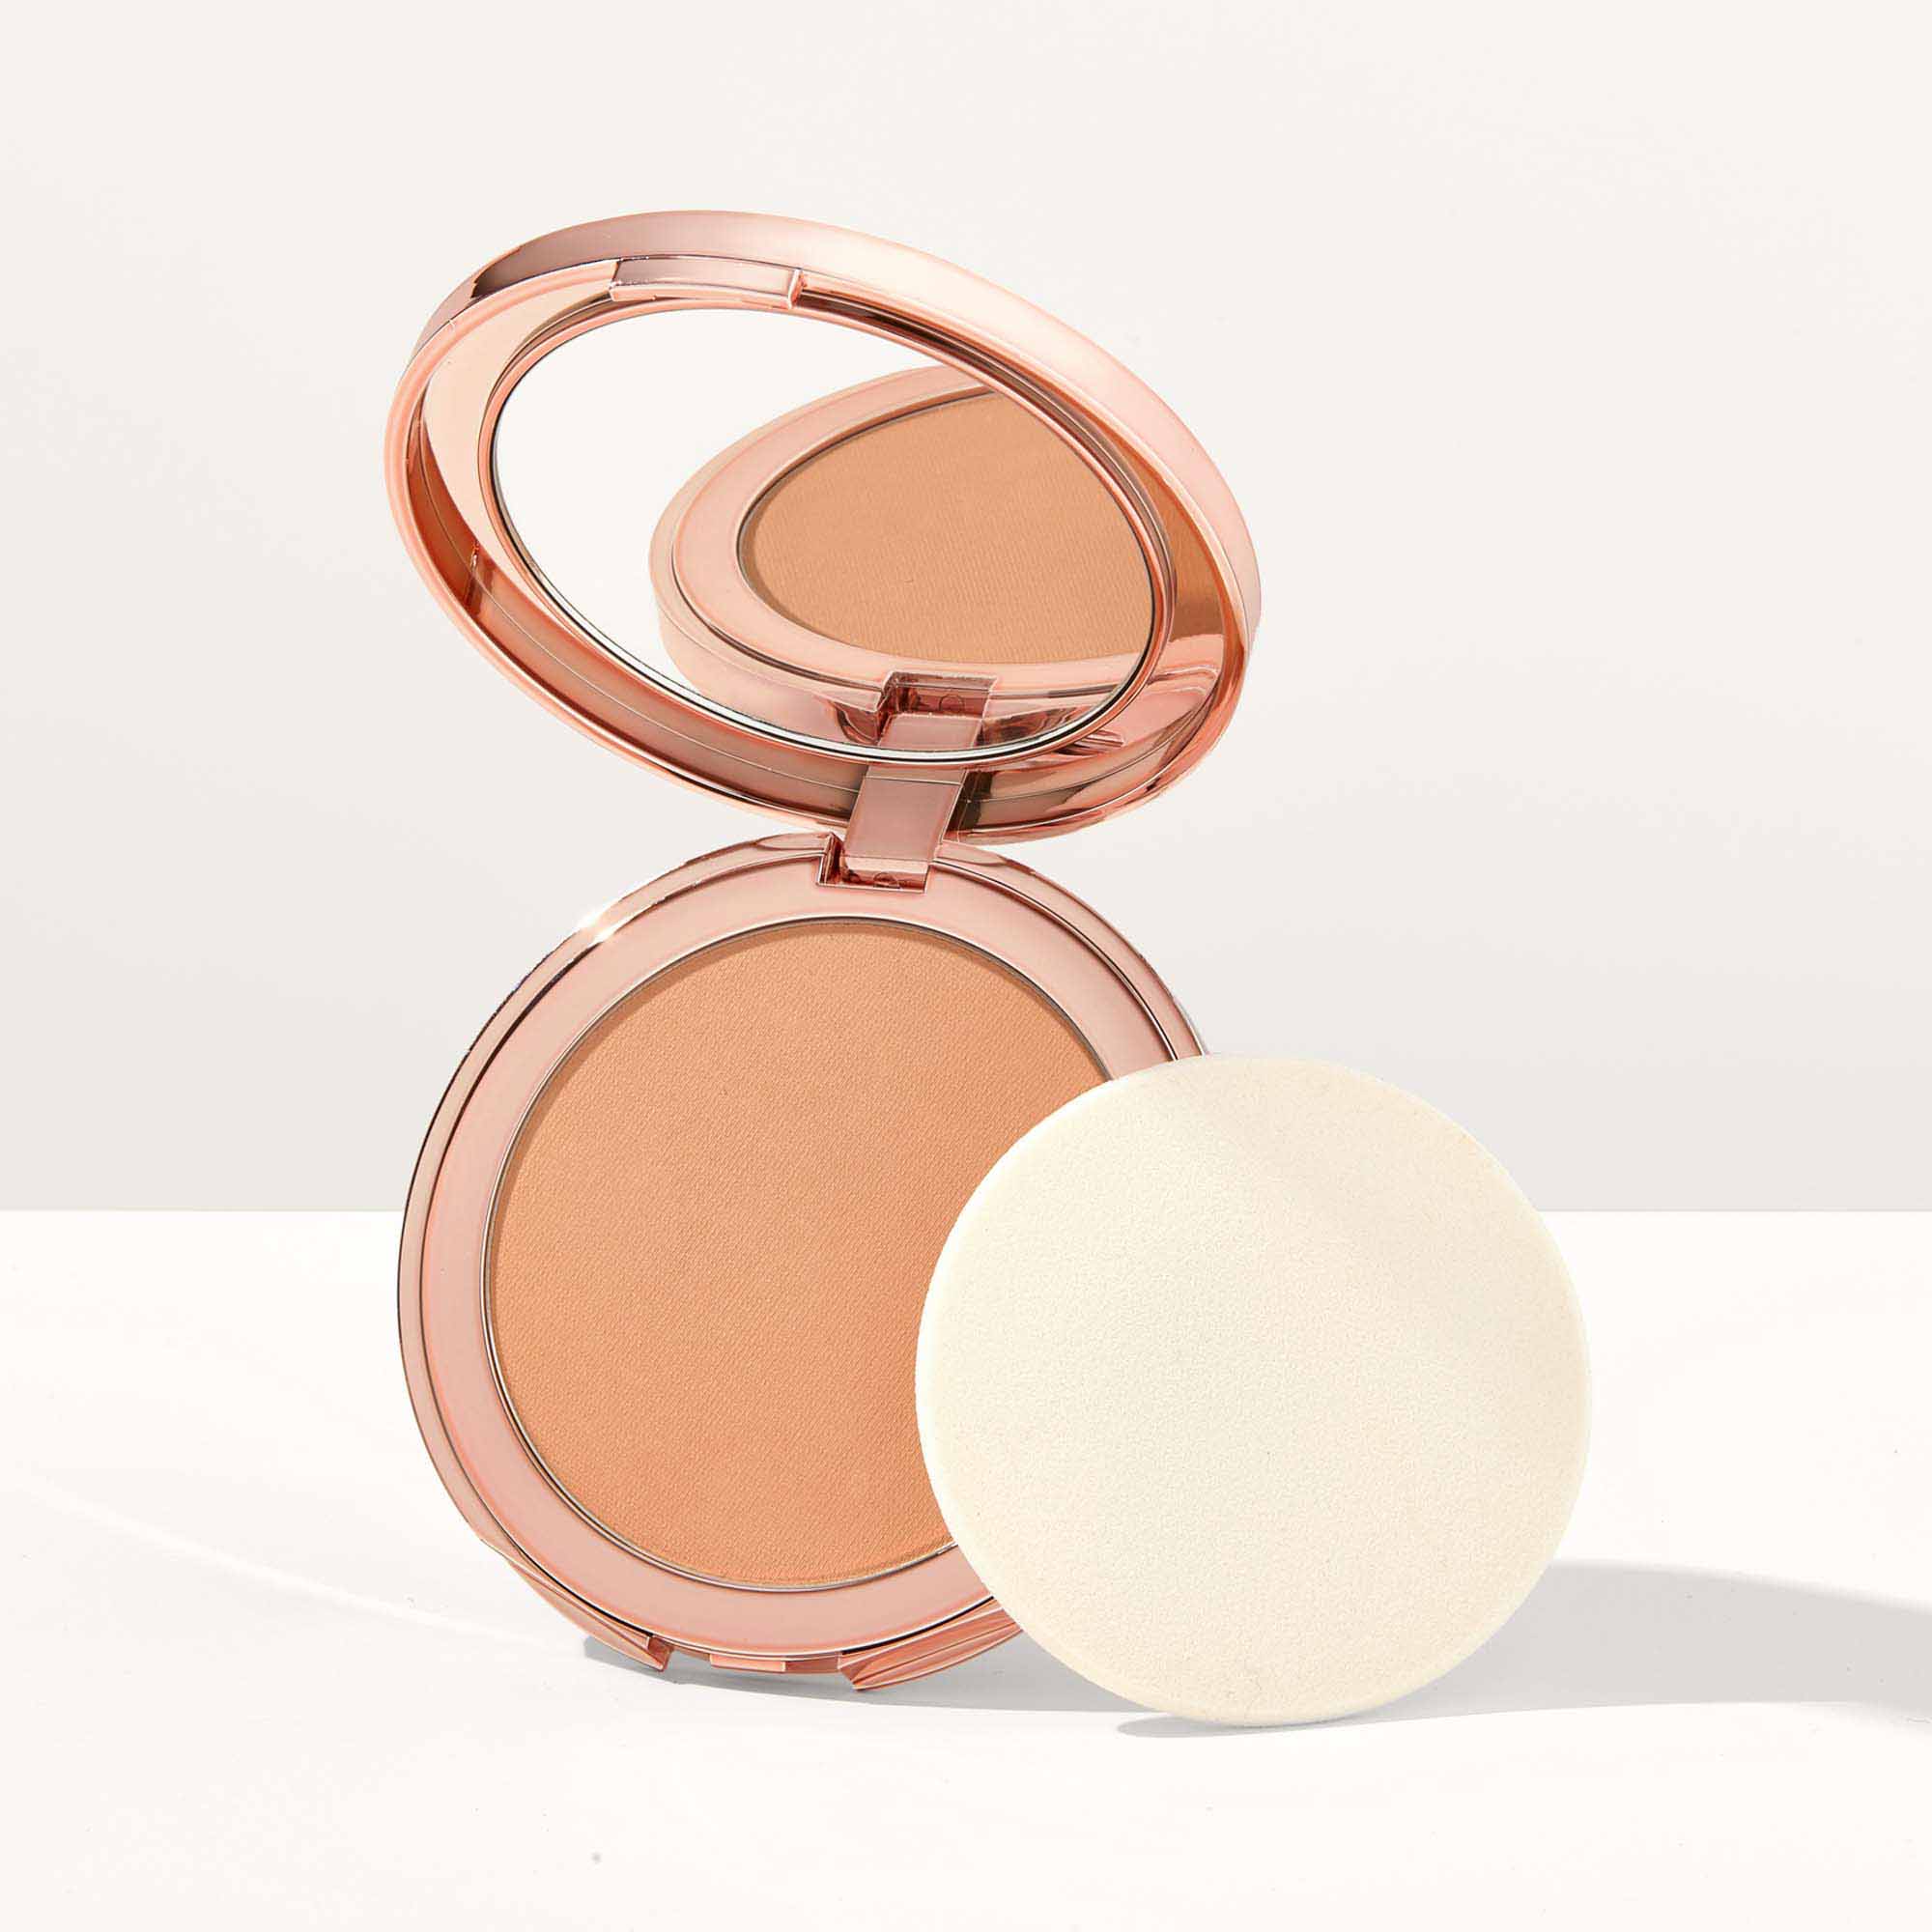 Tarte Cosmetics Smooth Operatorâ?¢ Amazonian Clay Tinted Pressed Finishing Powder In White